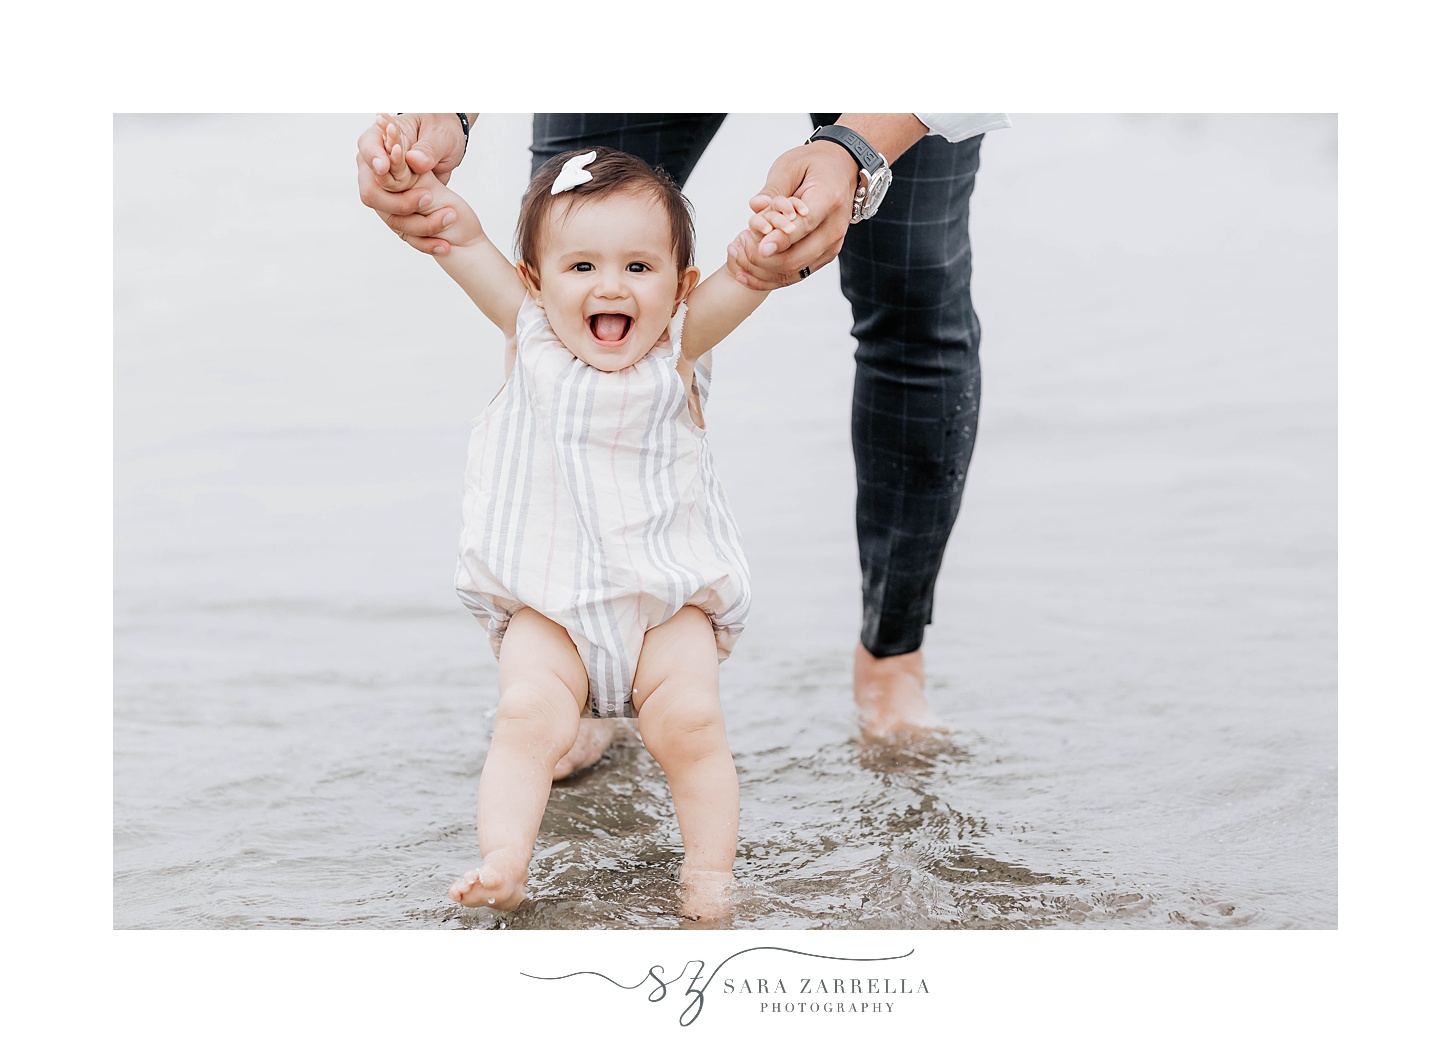 baby stands up on beach with parent's help during beach minis with Sara Zarrella Photography